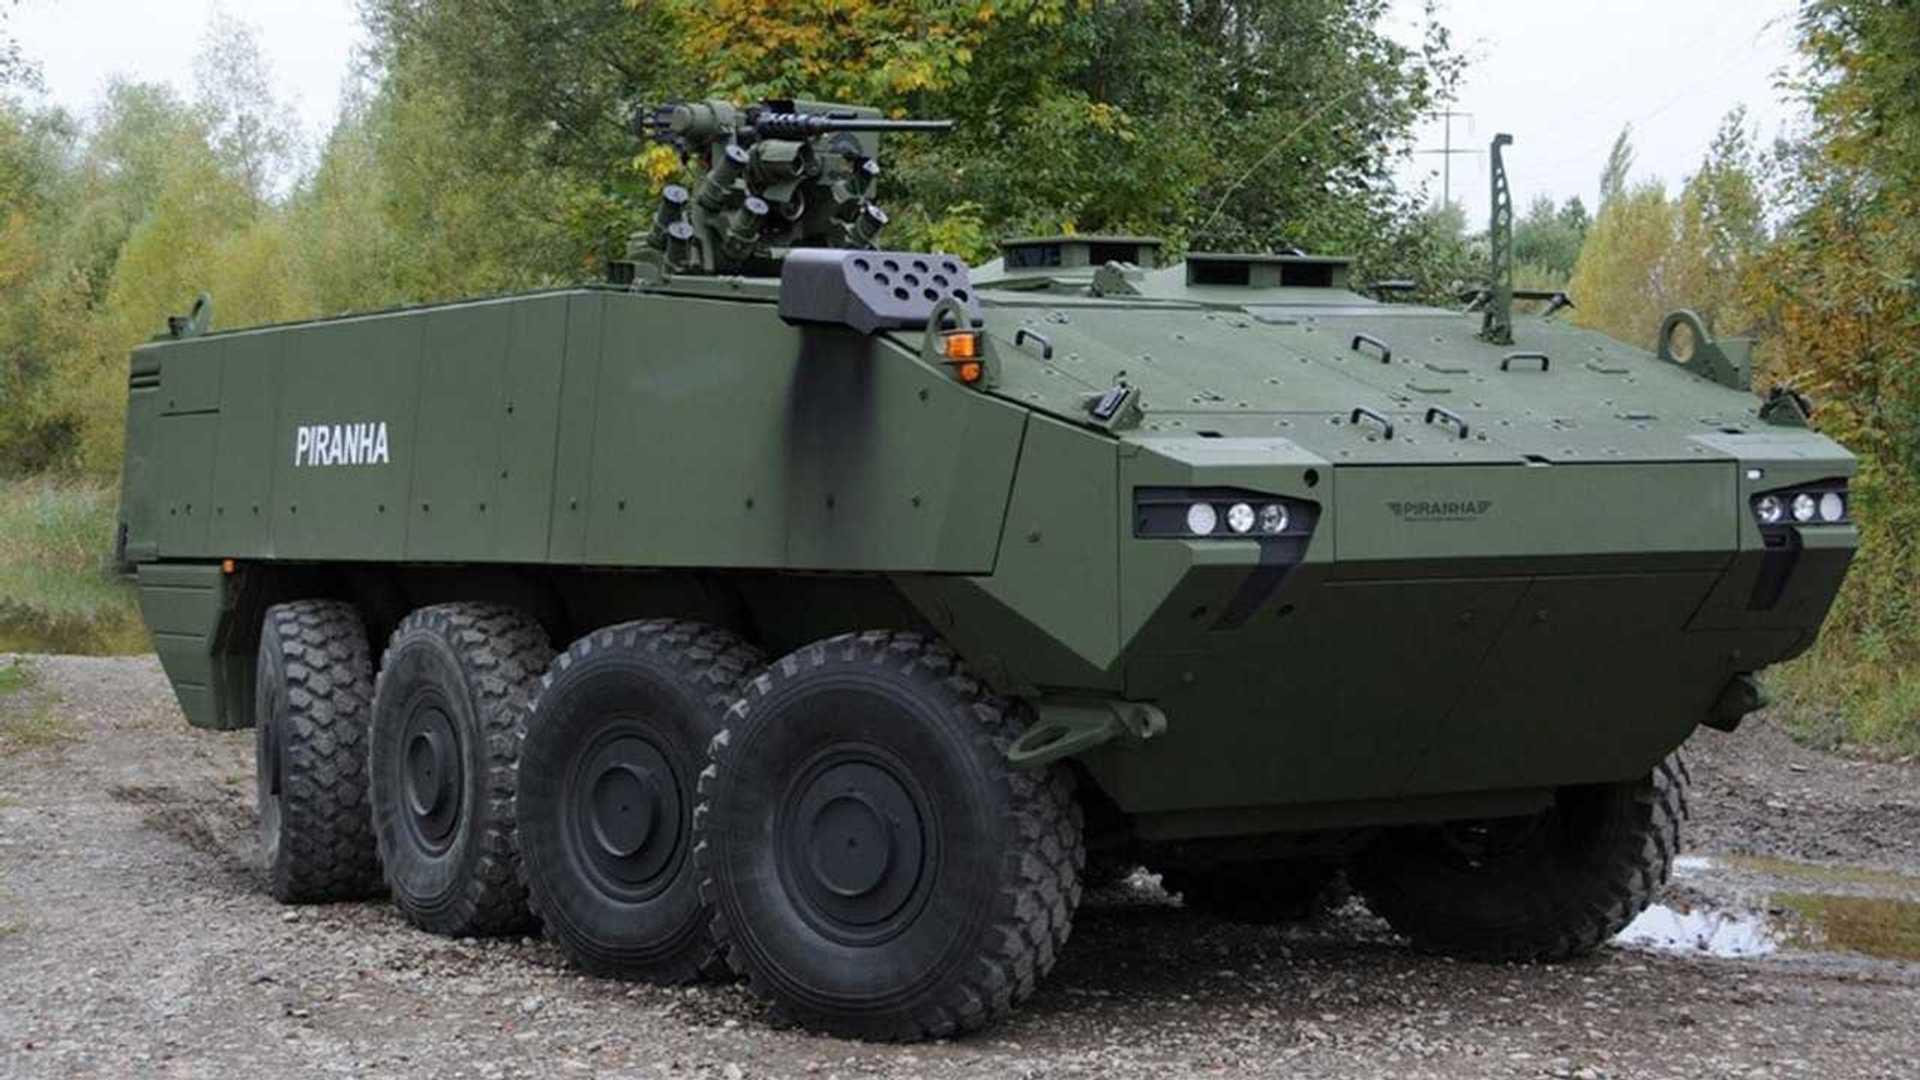 armored-personnel-carriers-that-resemble-tesla-truck.jpg